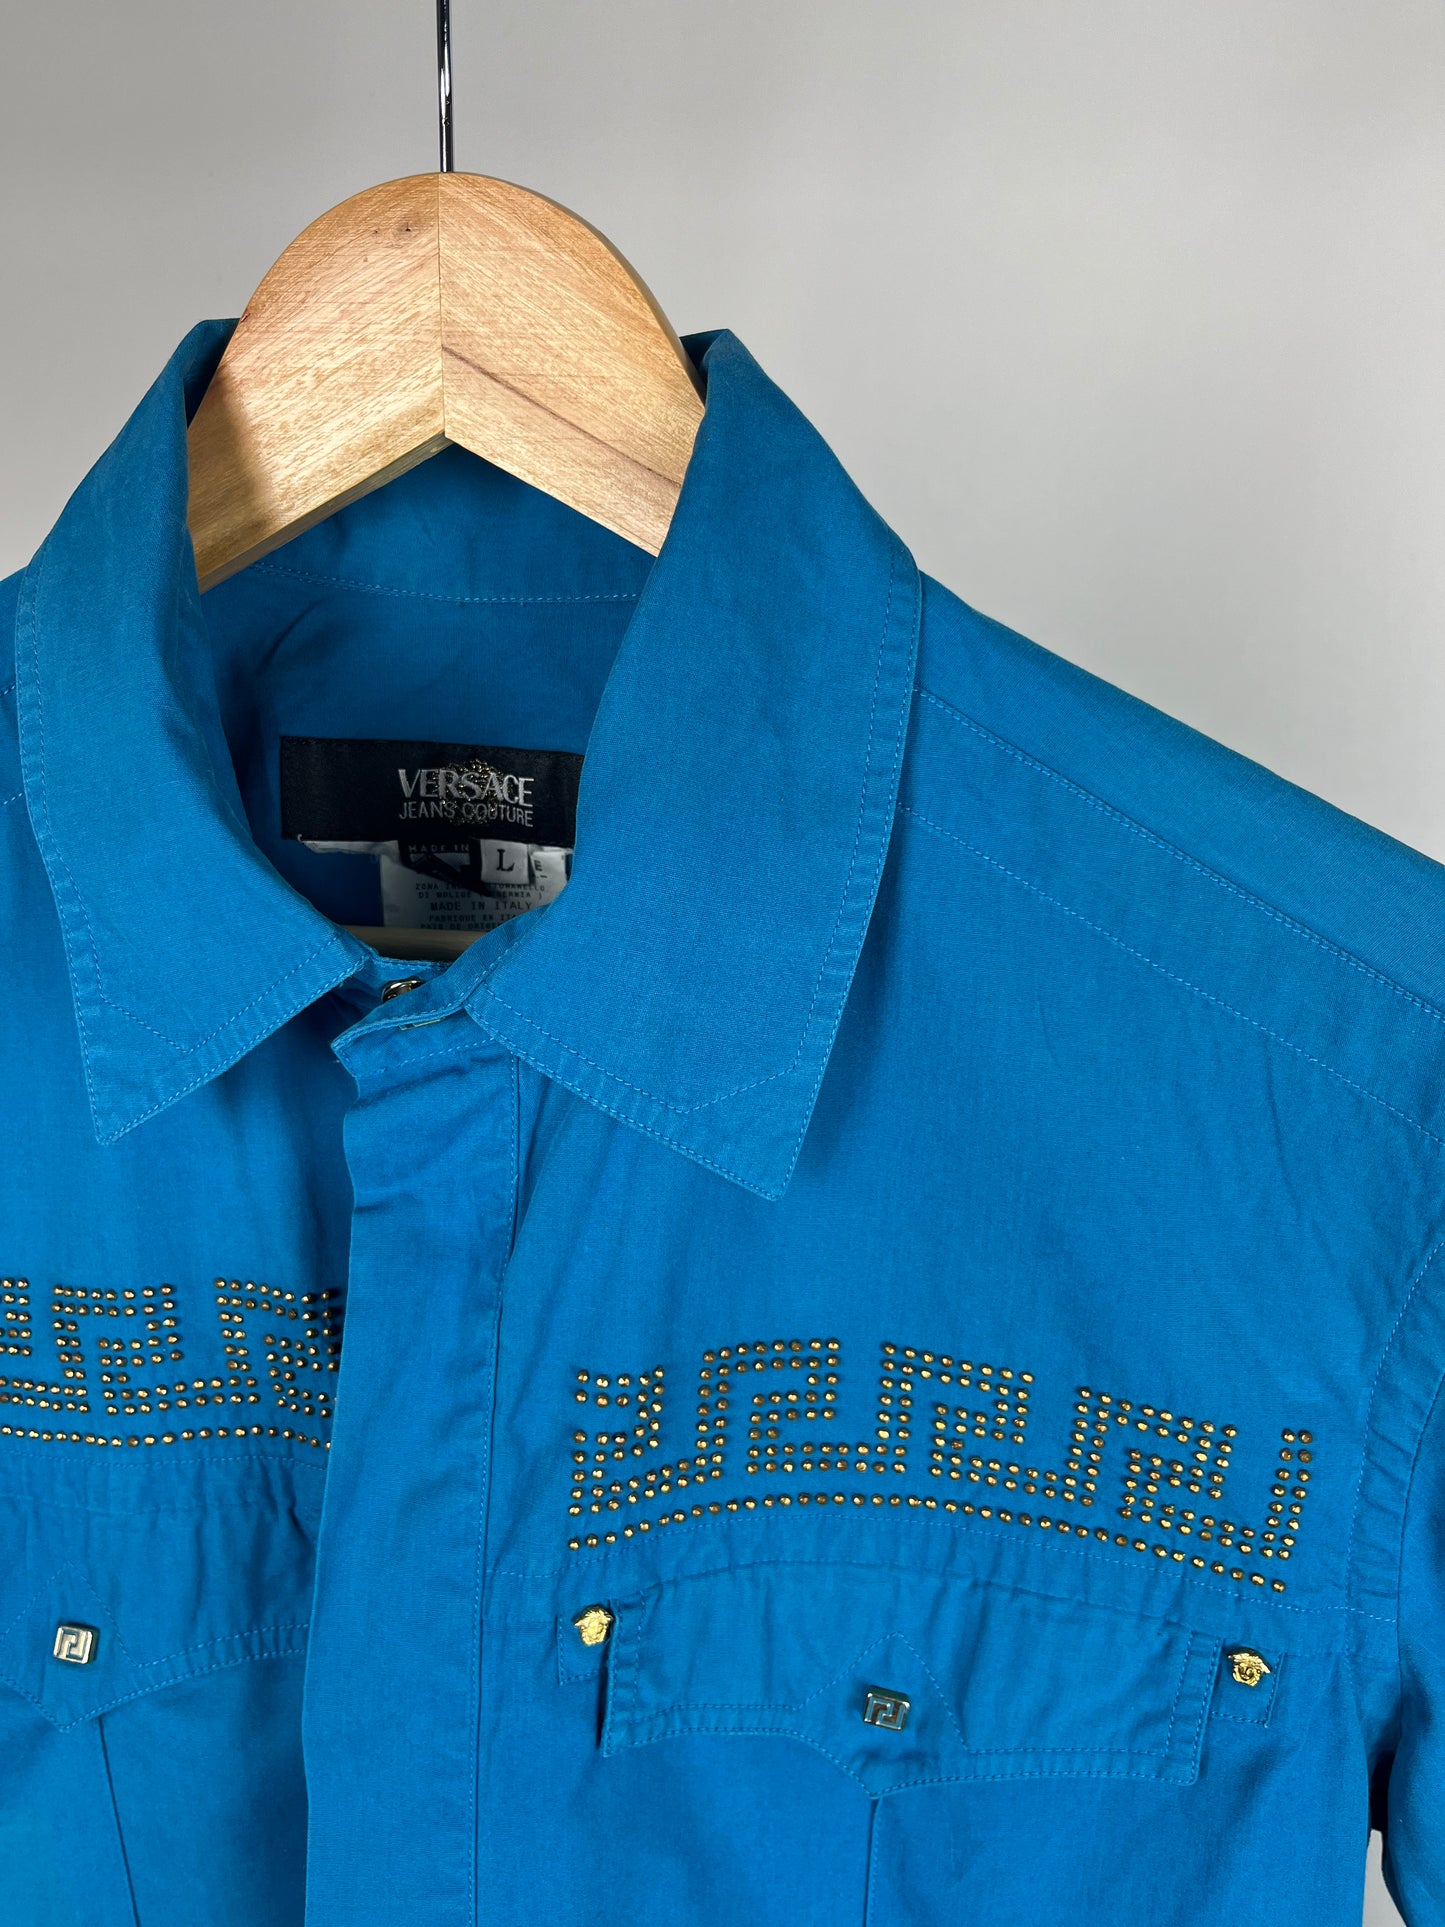 Versace Jeans Couture blue shirt with studs